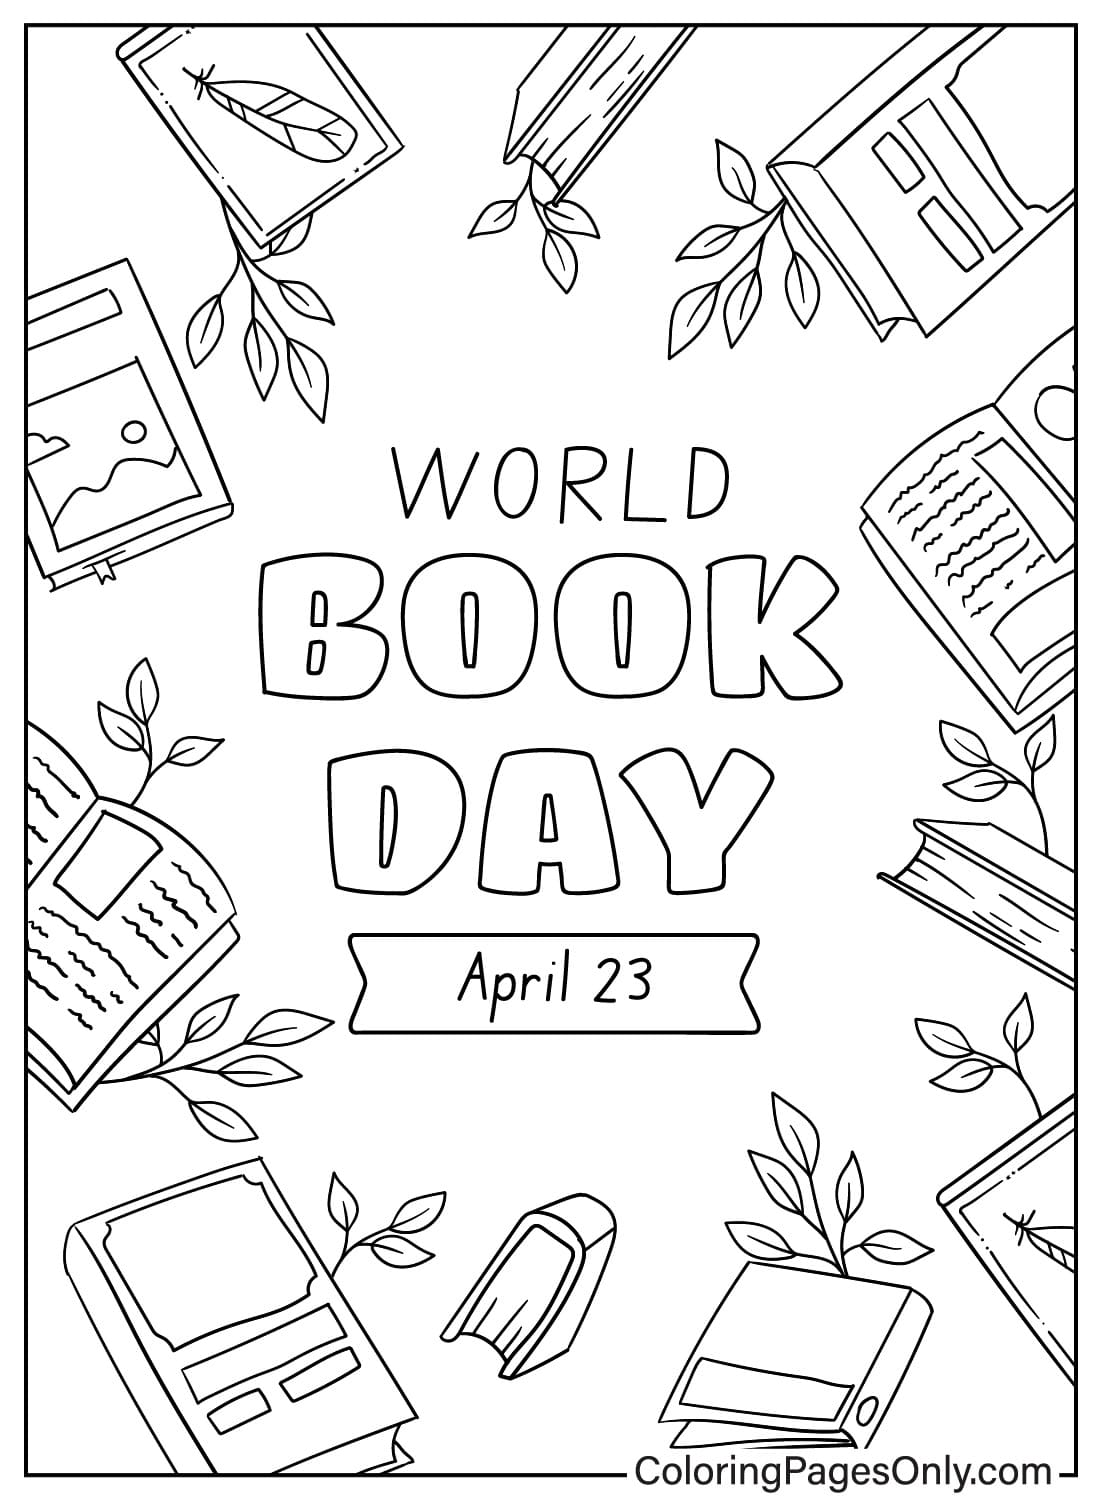 World Book Day Coloring Page JPG from World Book Day